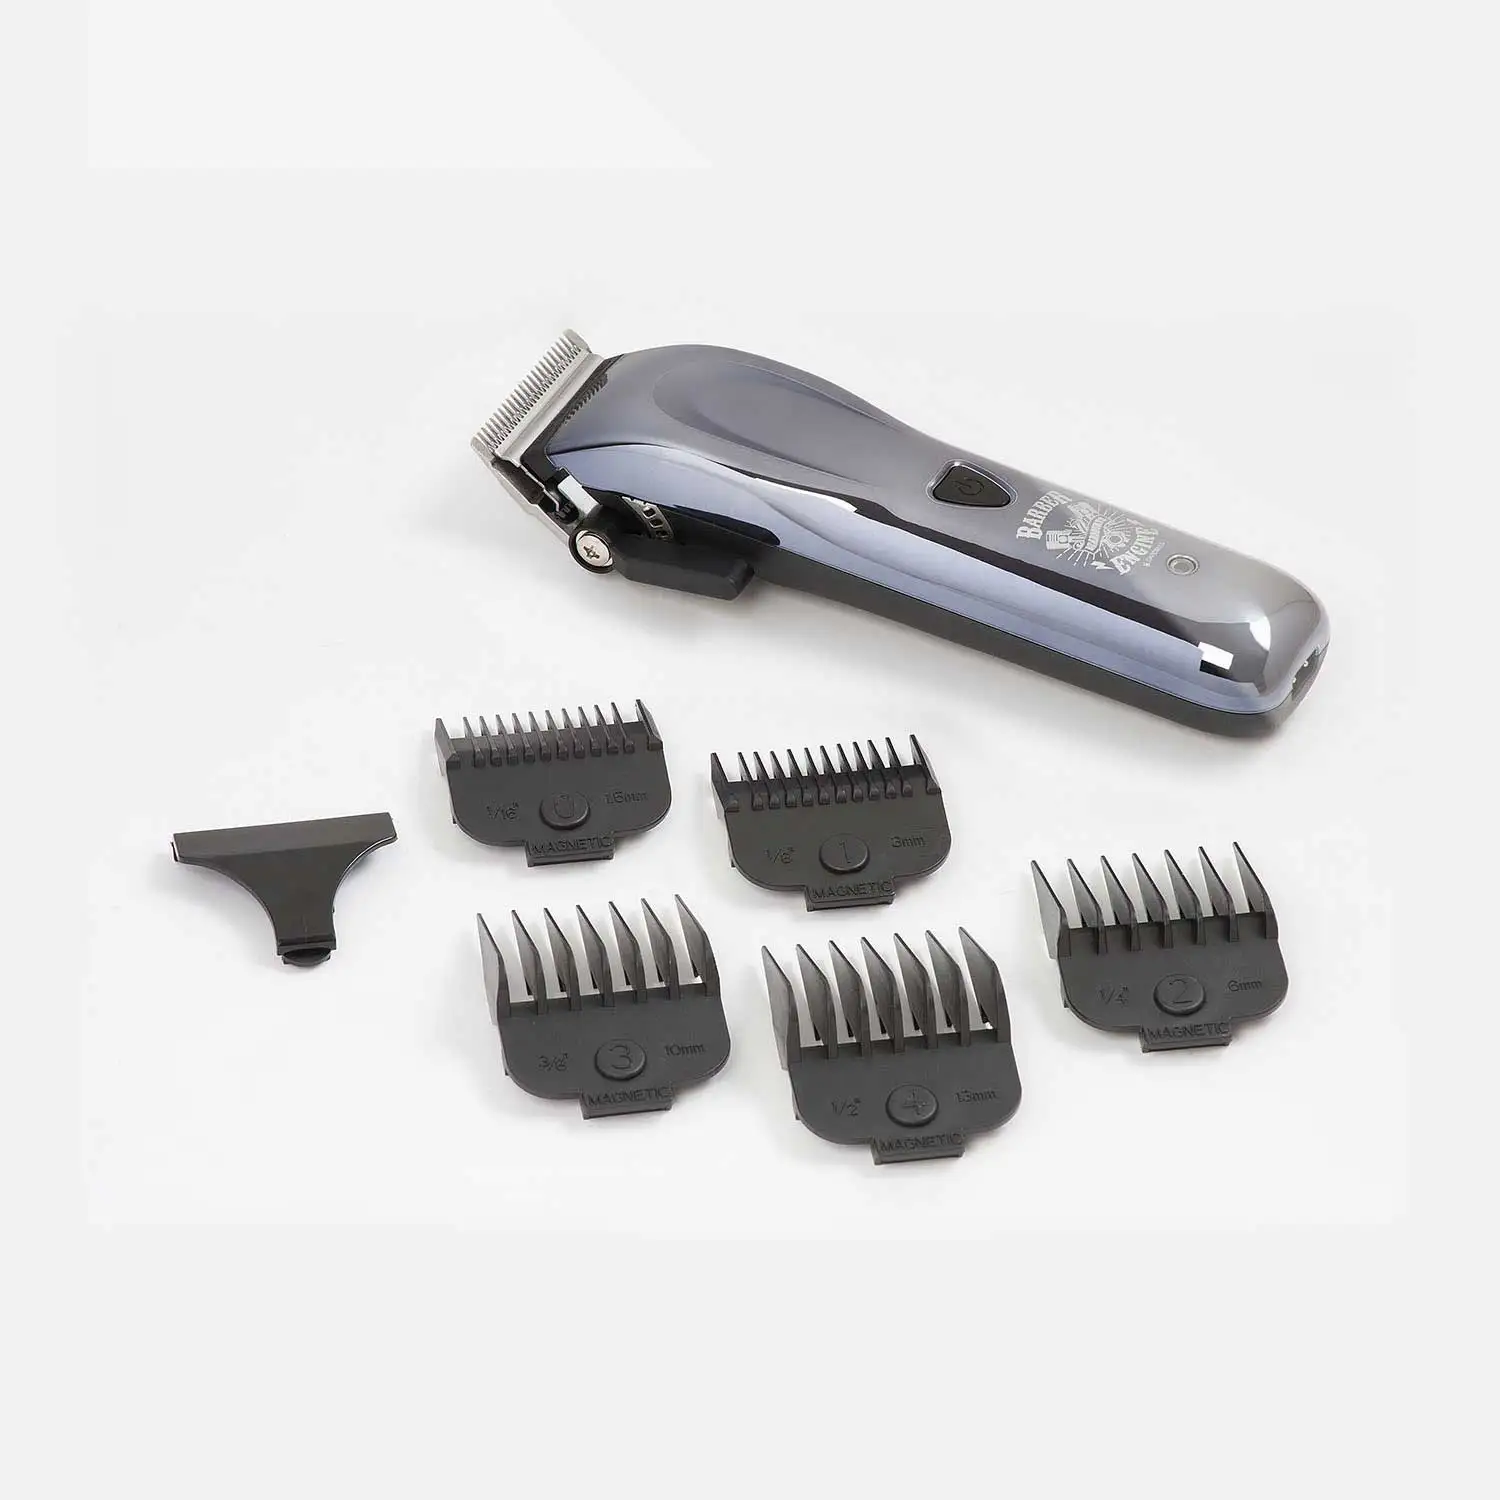 Beardburys Fade Boost Hair Cutting Machine Best Hairdressers Awards 2019 And 2020 Professional Barber Shop, Color, Carbon Blades - Hair Cutting Kits - AliExpress